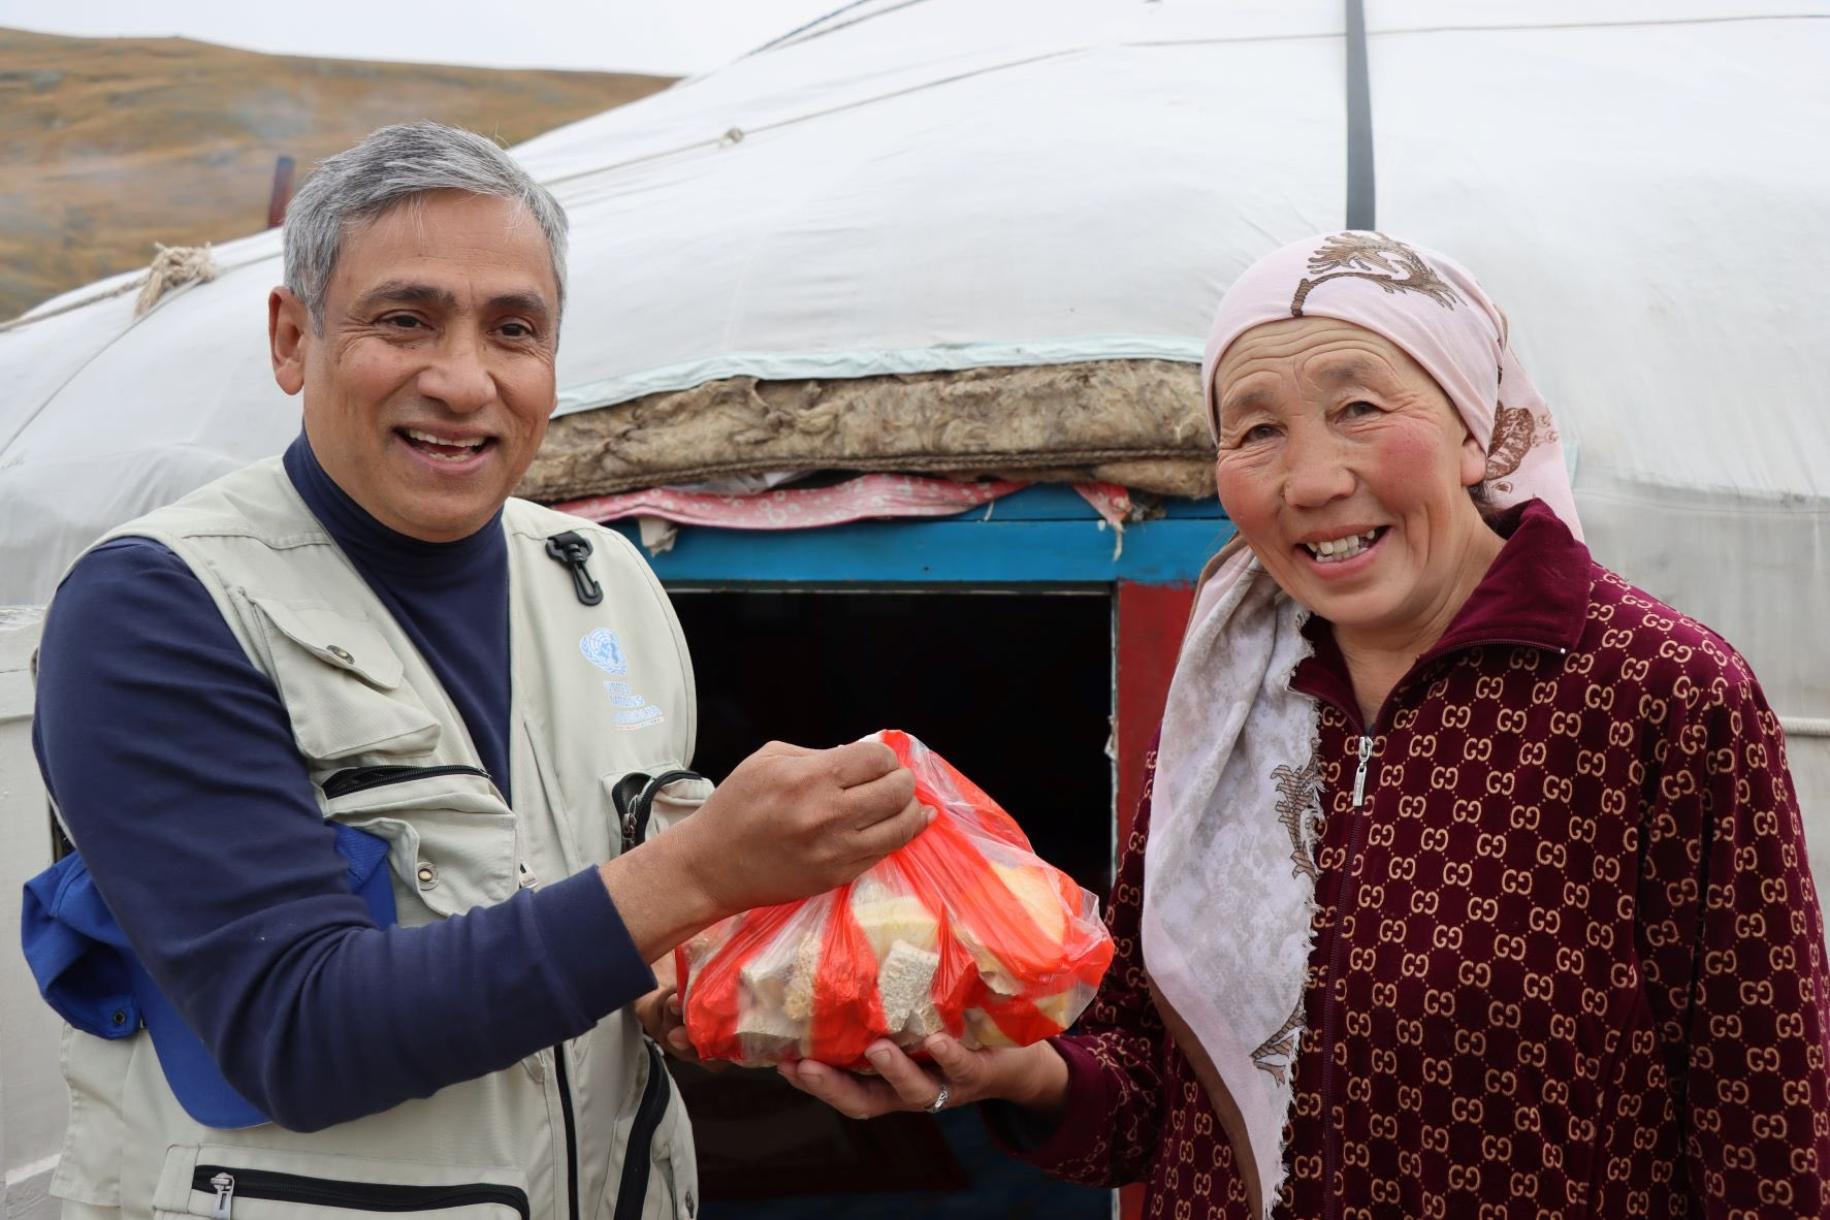 A man in a blue shirt and grey vest hands over an orange coloured bag to a woman in a red dress and headscarf in front of a Yurt in Mongolia